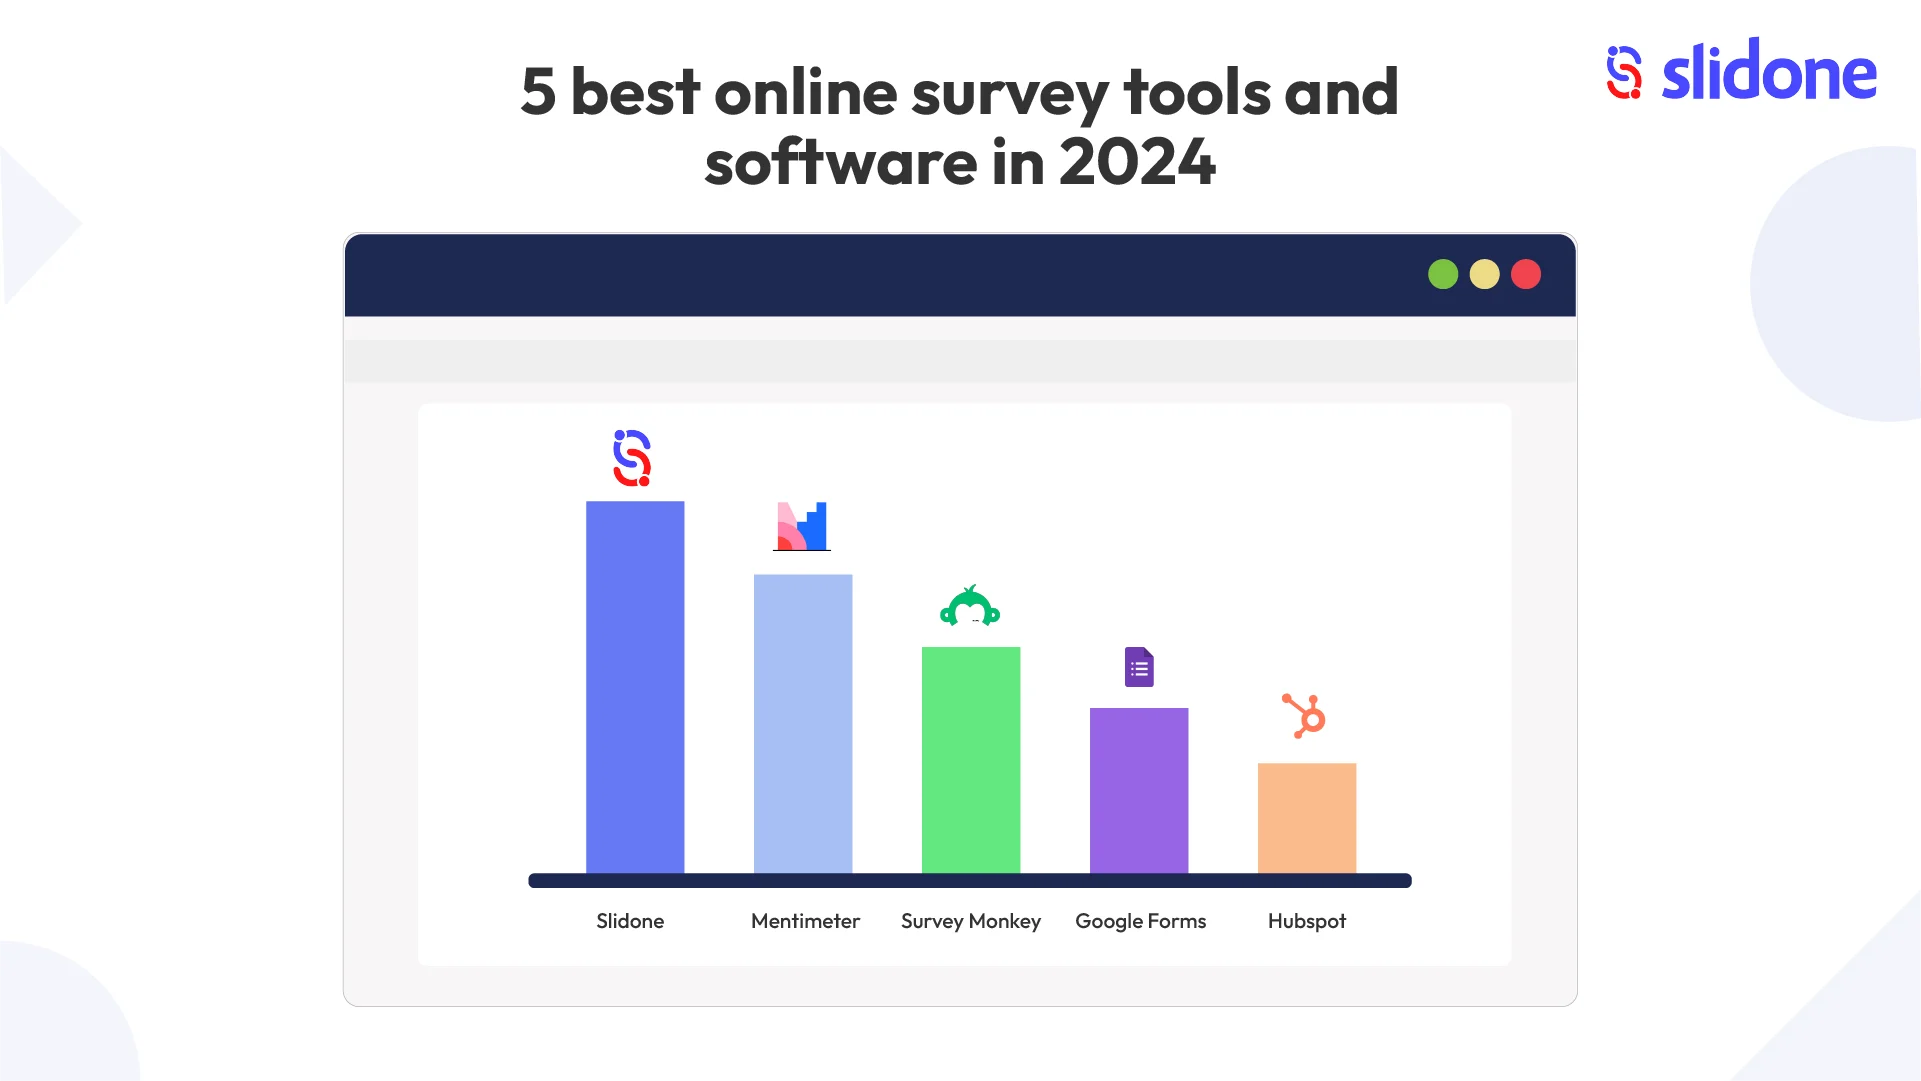 5 best online survey tools and software in 2024